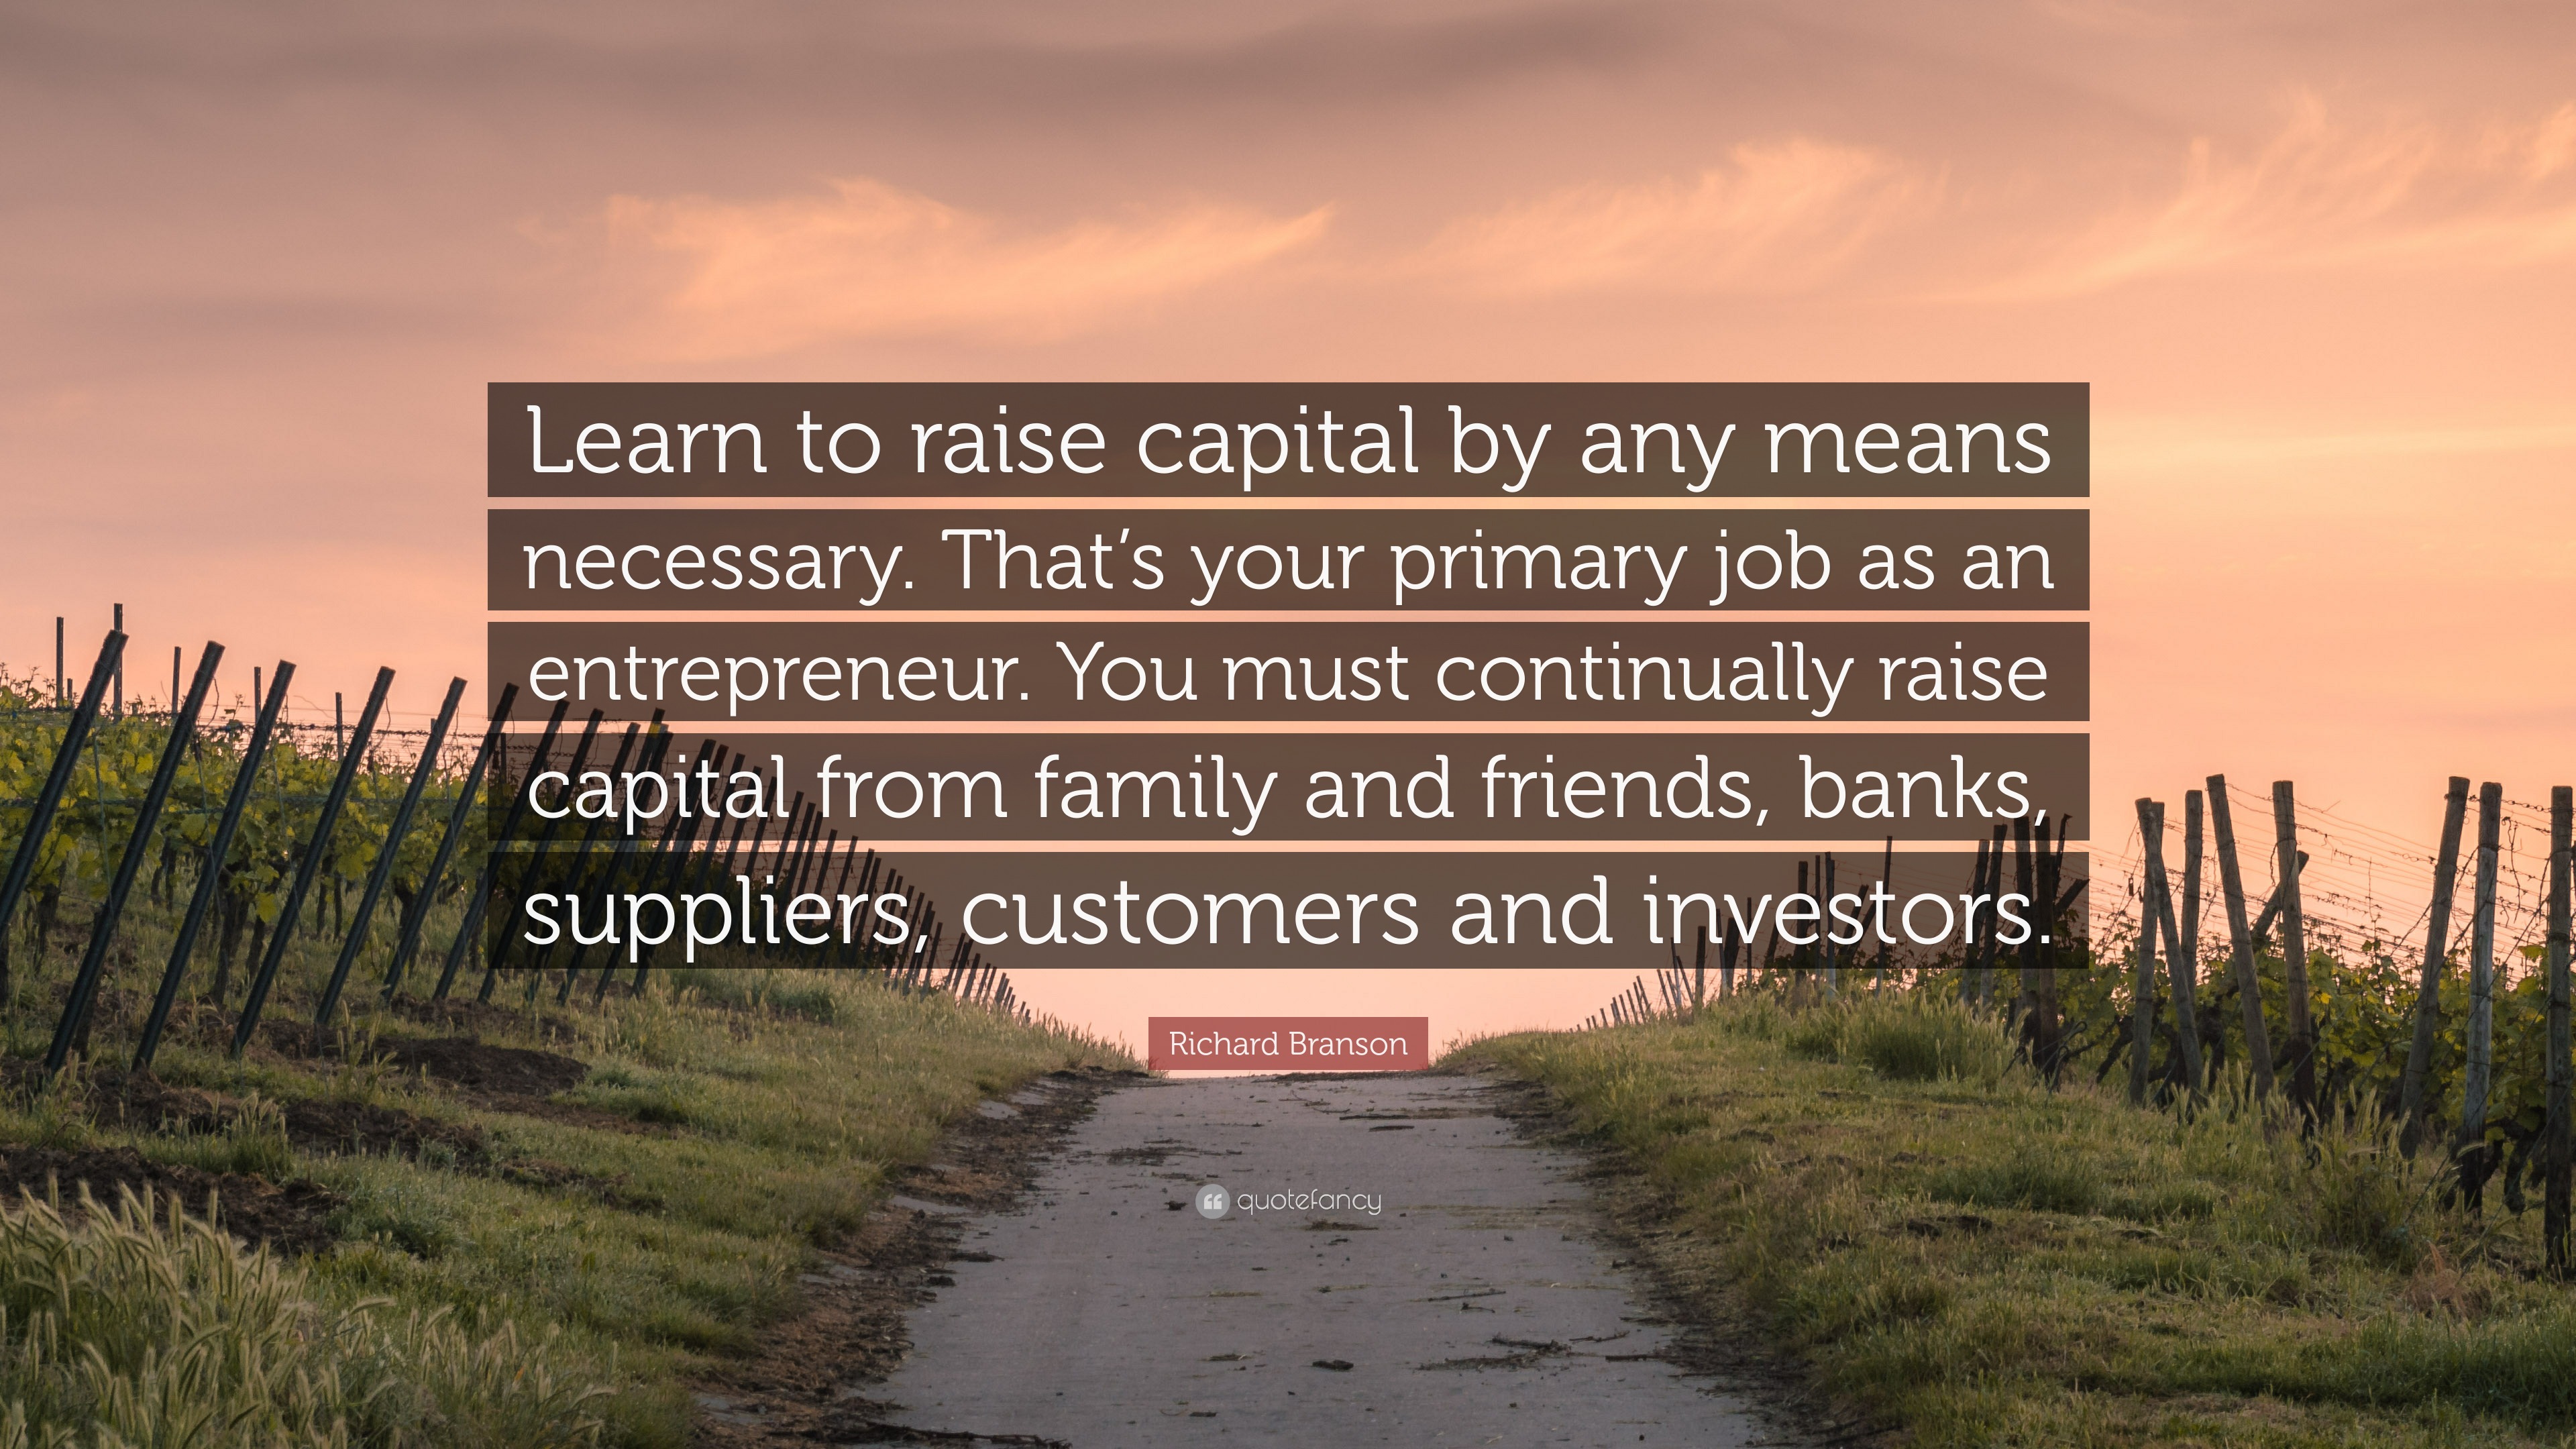 Learn to raise capital by any means
necessary. That's your primary job as an

fy entrepreneur. You must continually raise
BRE le feo) RE ACI Te RAEI glo EH oR 1EH

PLAICE Cll and ae
did . ube He lf

 

 

Richard Branson

fo i

@ quotefancy